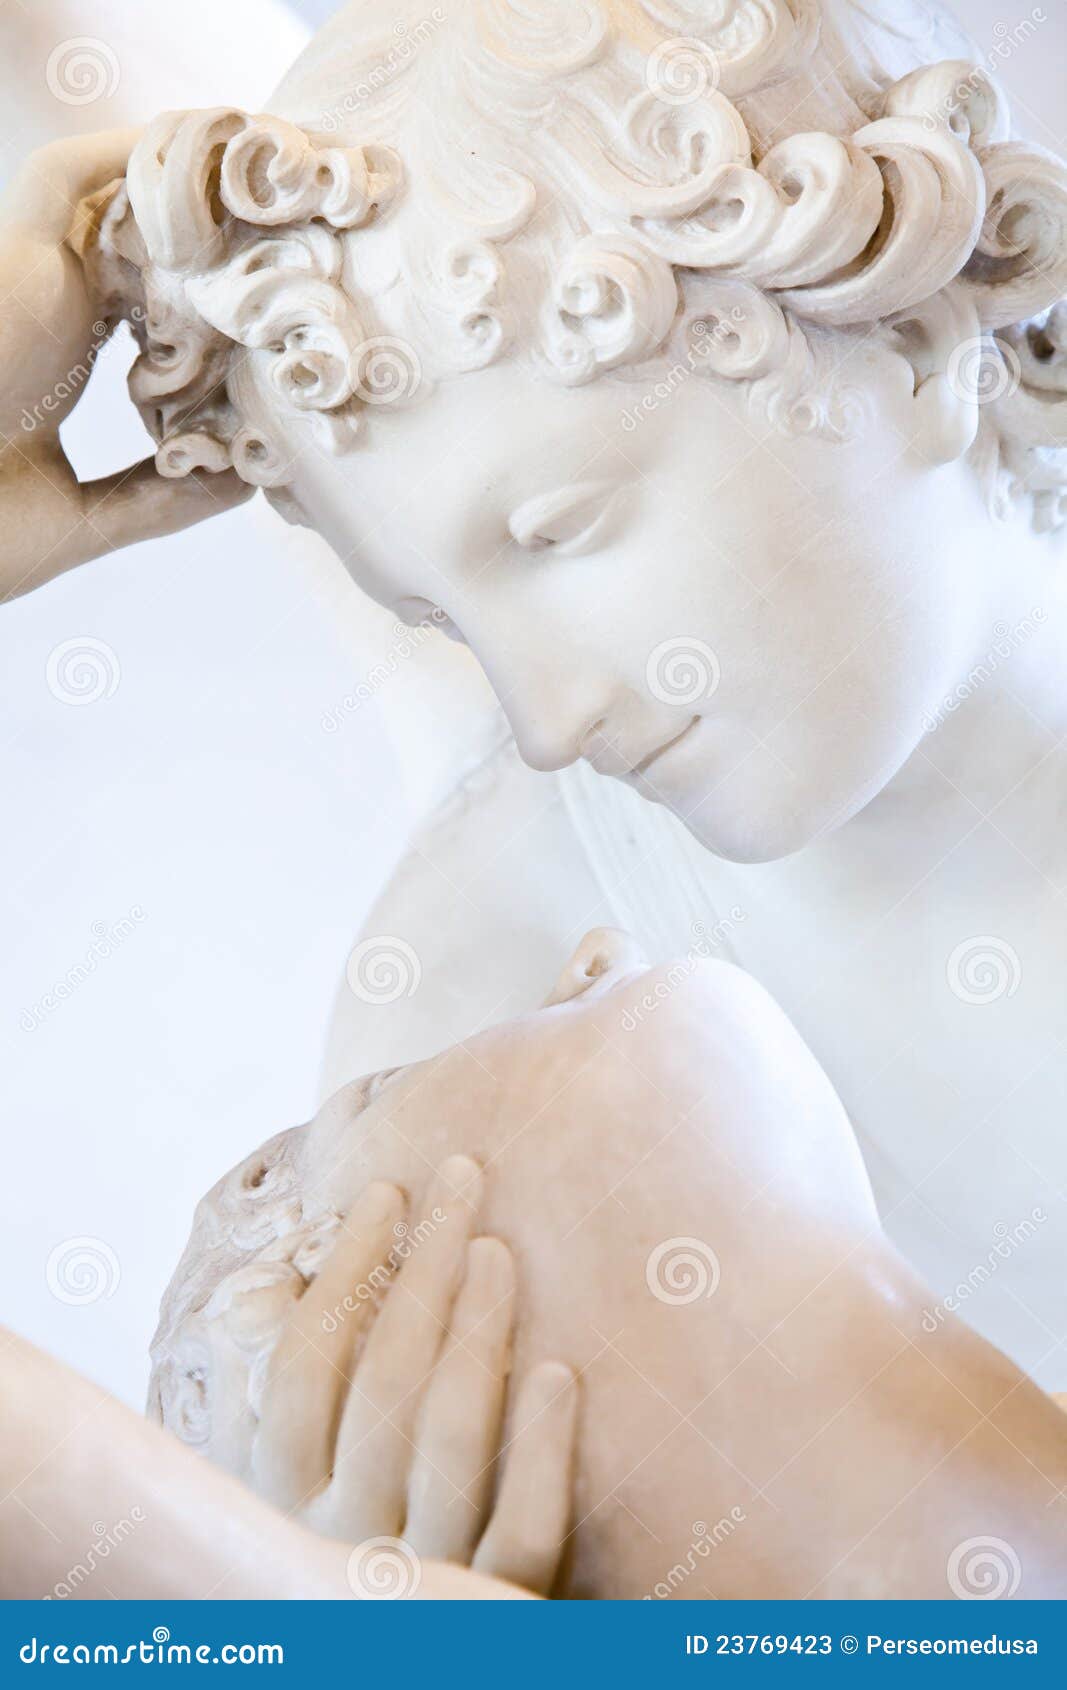 psyche revived by cupid kiss